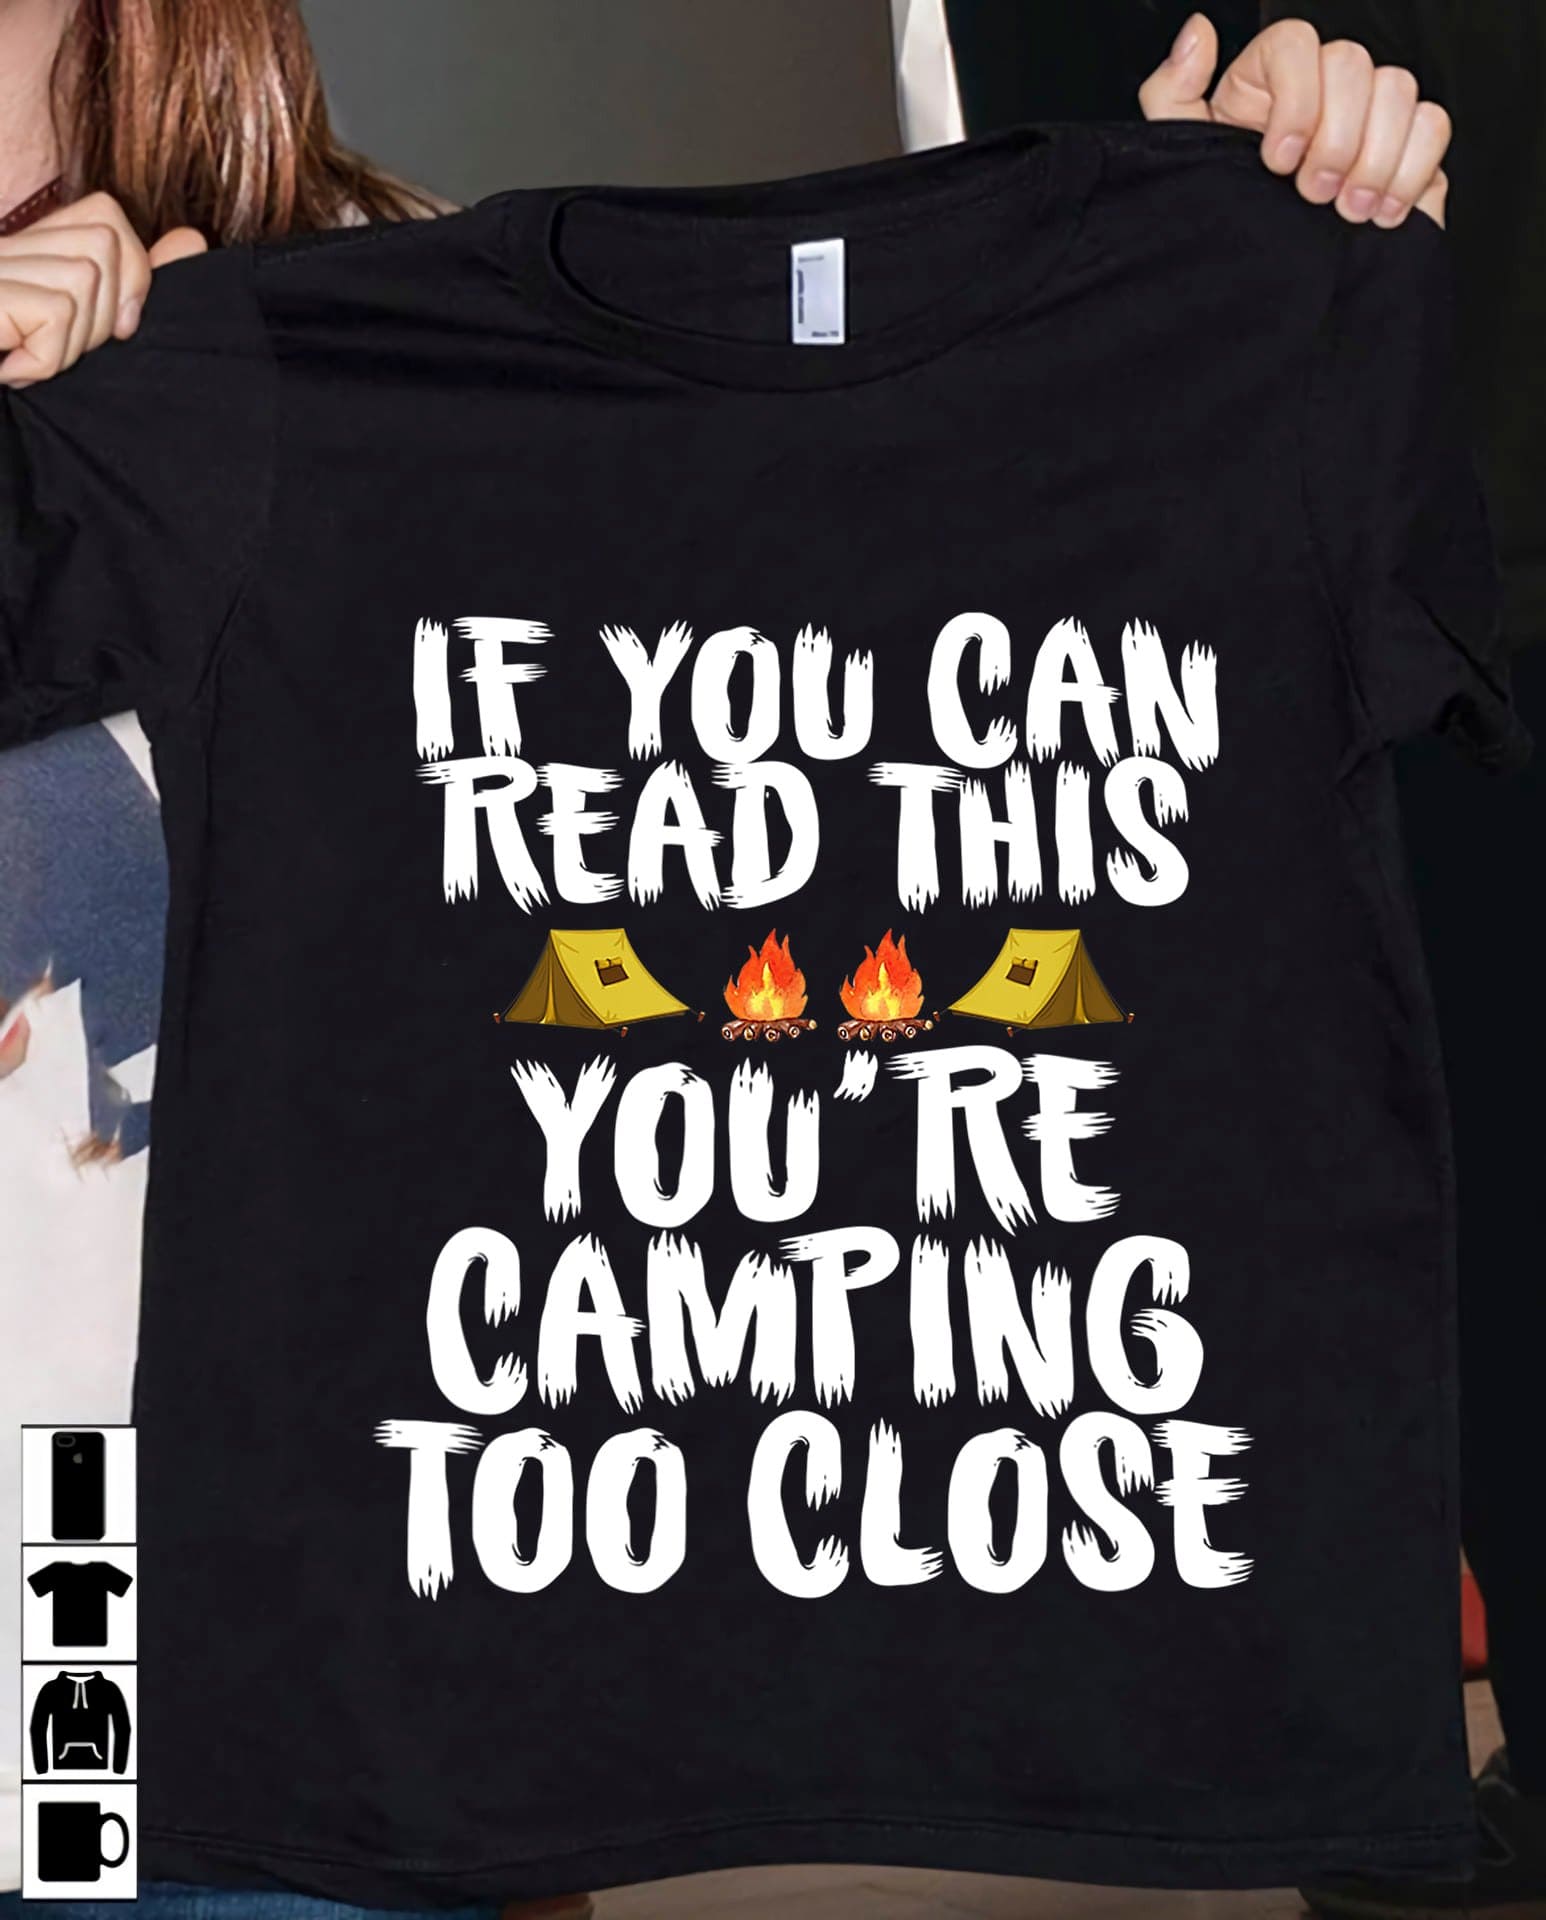 If you can read this you're camping too close